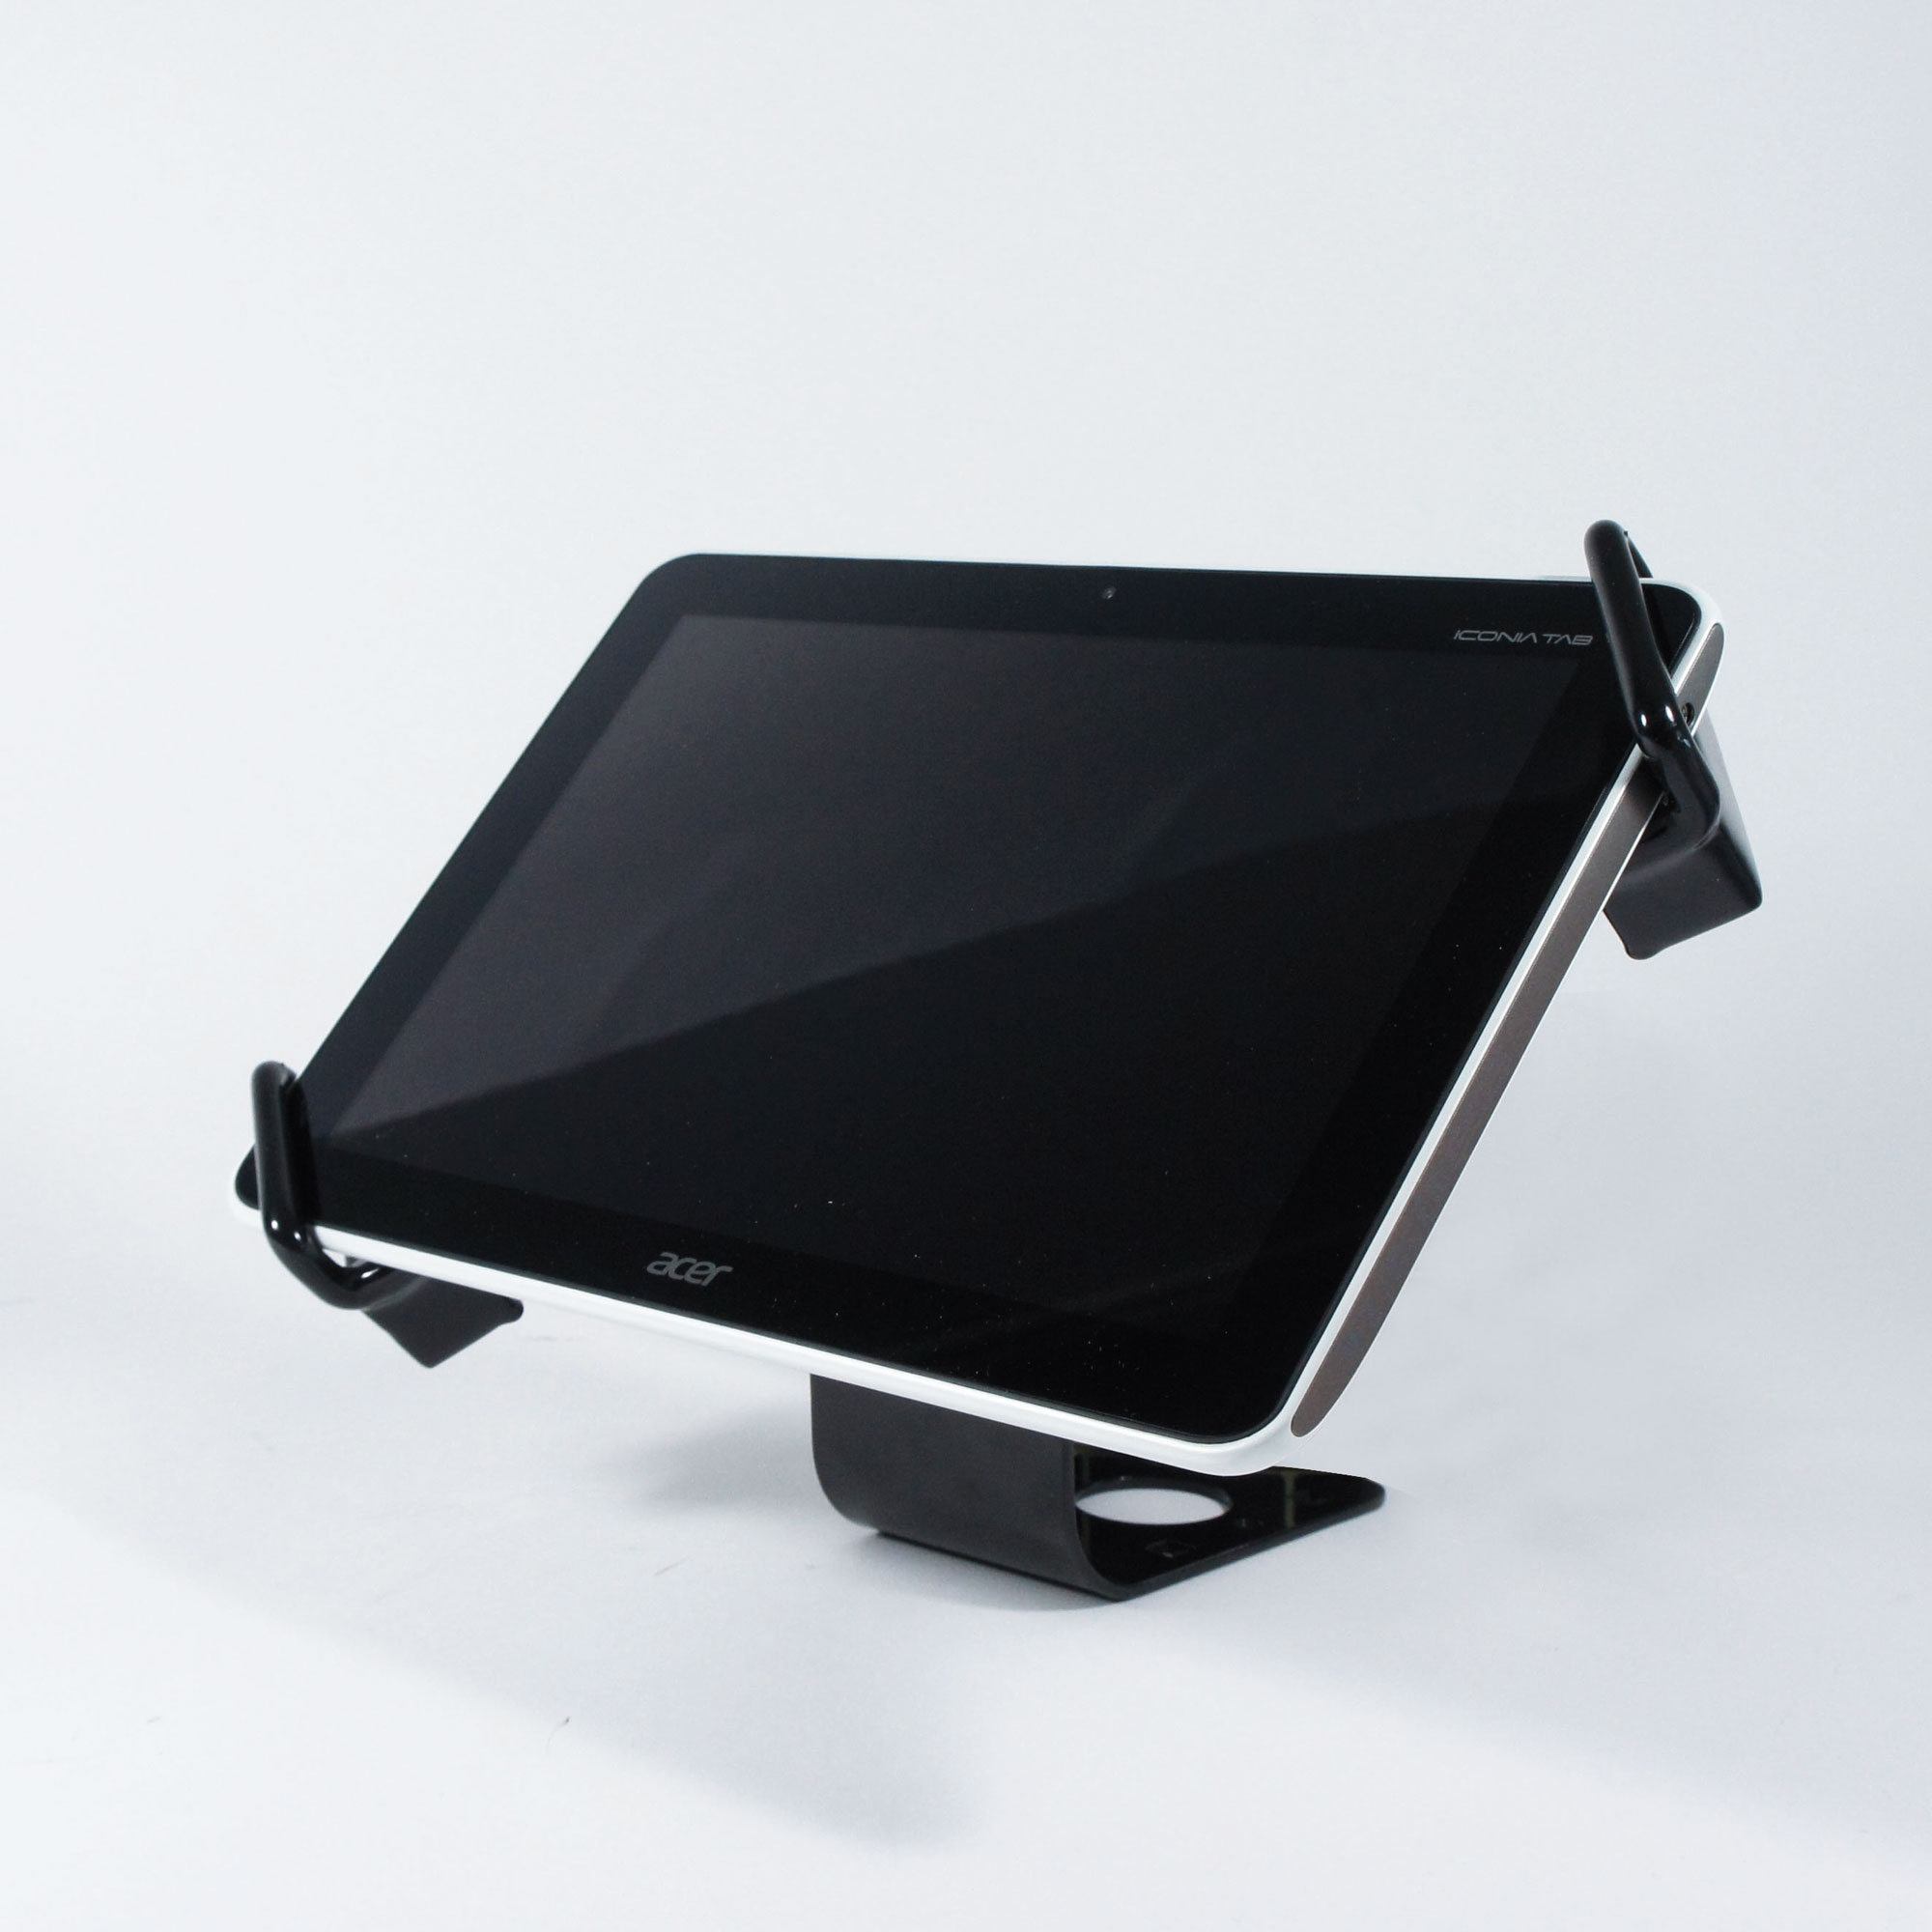 Security stand | Mechanical protection for tablet